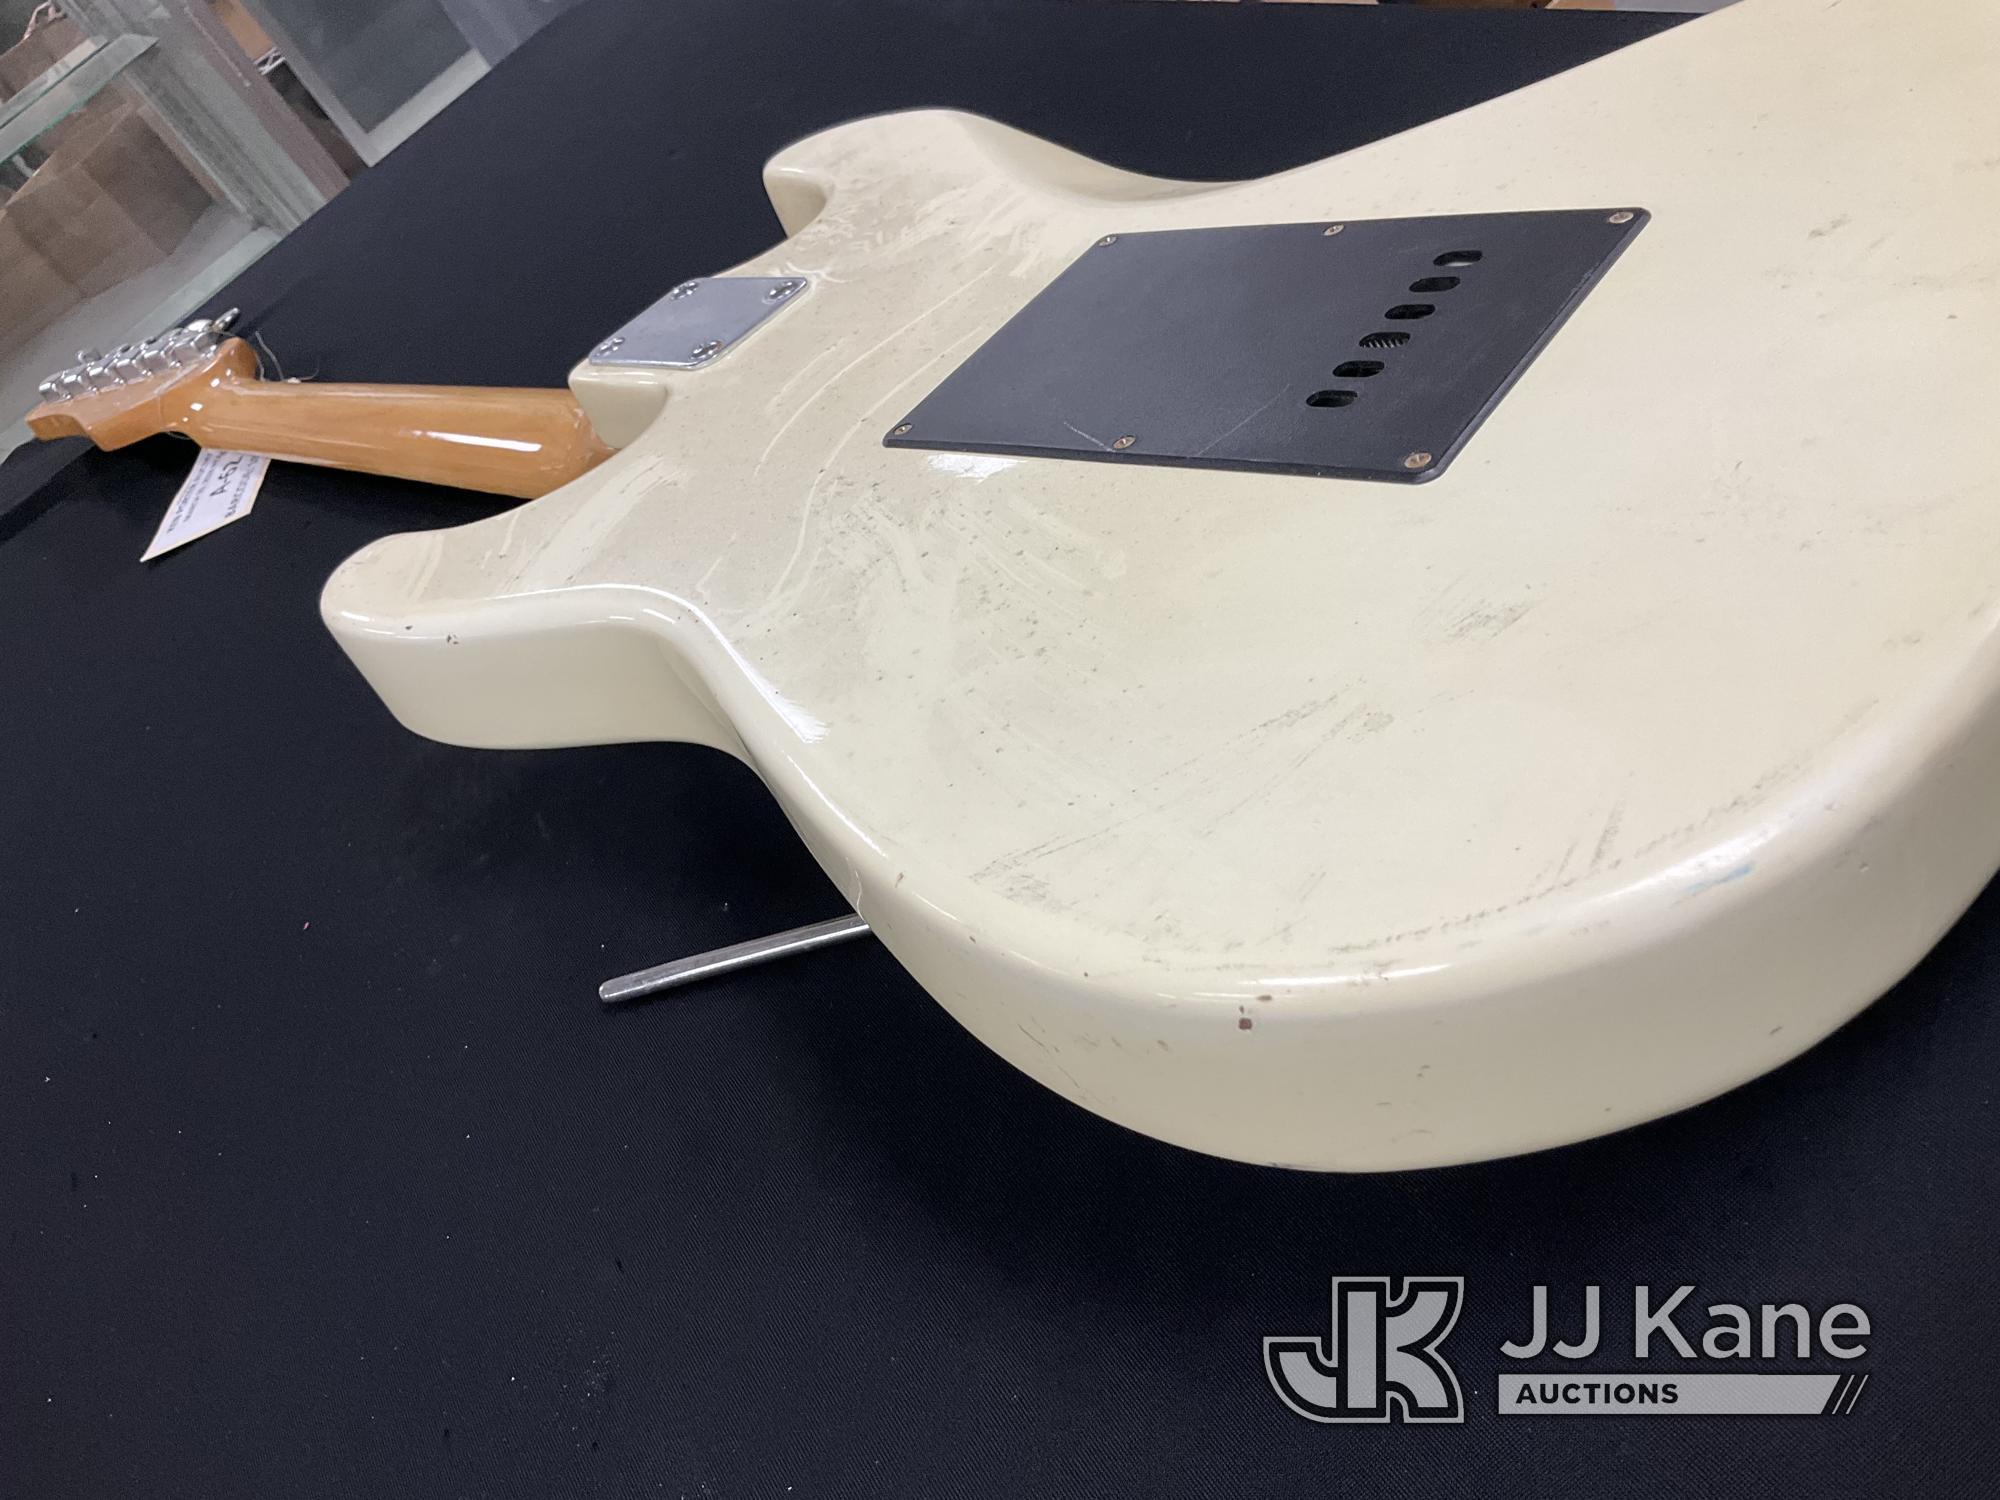 (Jurupa Valley, CA) Cruise Guitar (Used) NOTE: This unit is being sold AS IS/WHERE IS via Timed Auct